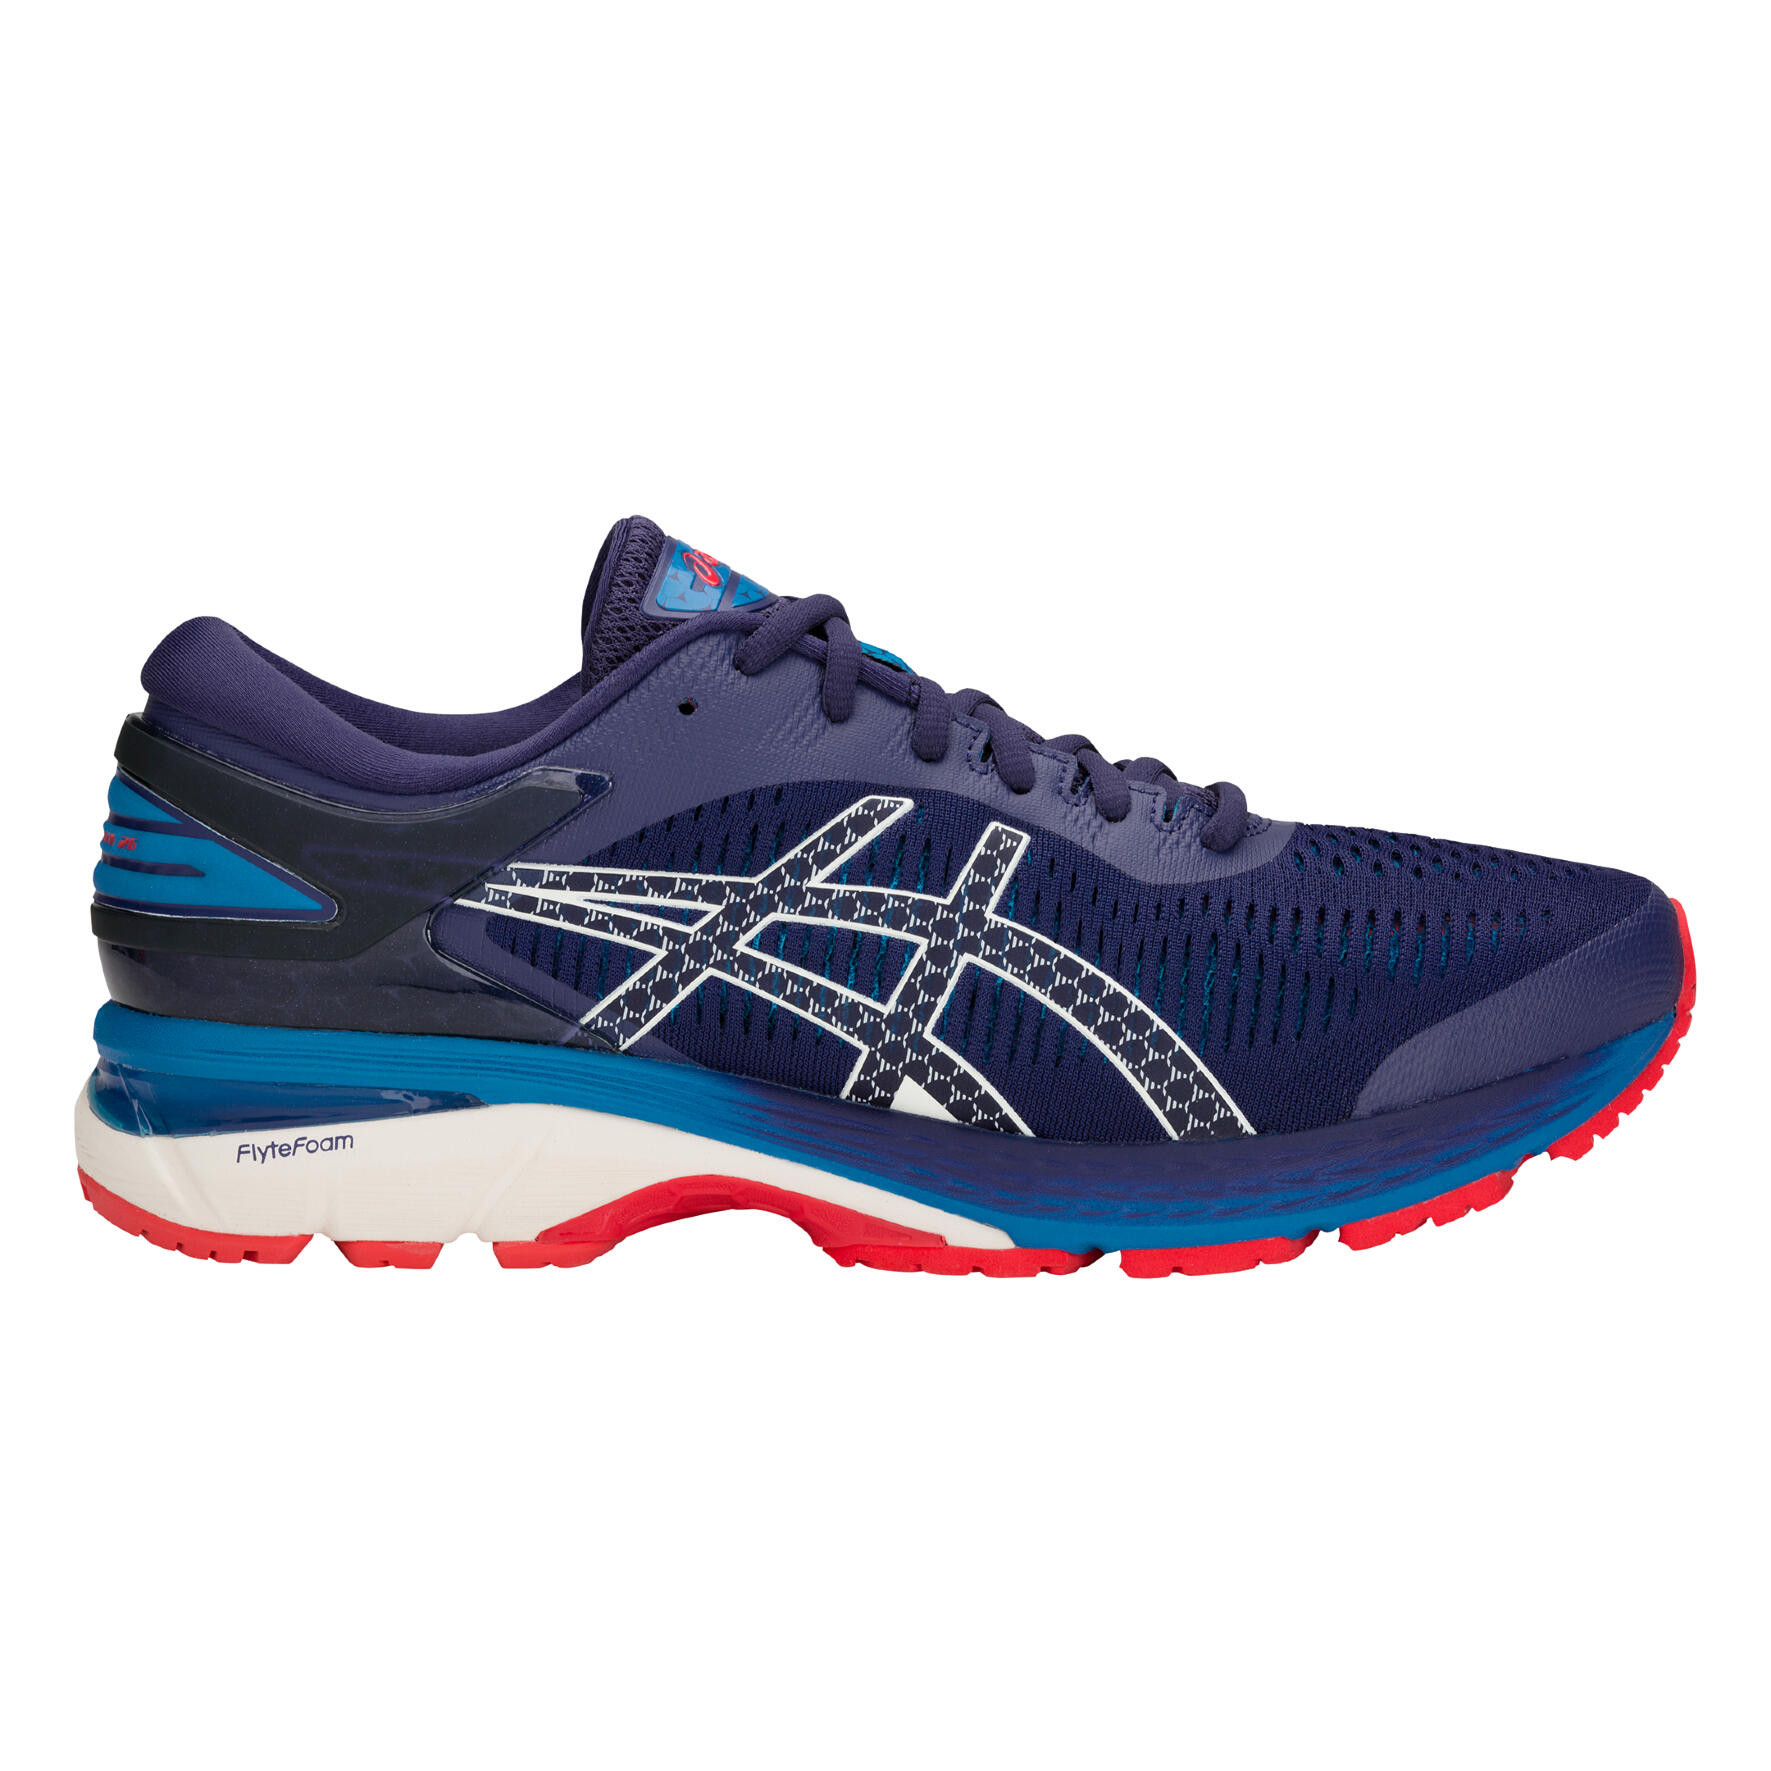 Asics Gel-Kayano 25 Mens Trainers 1011A019-400 2/3